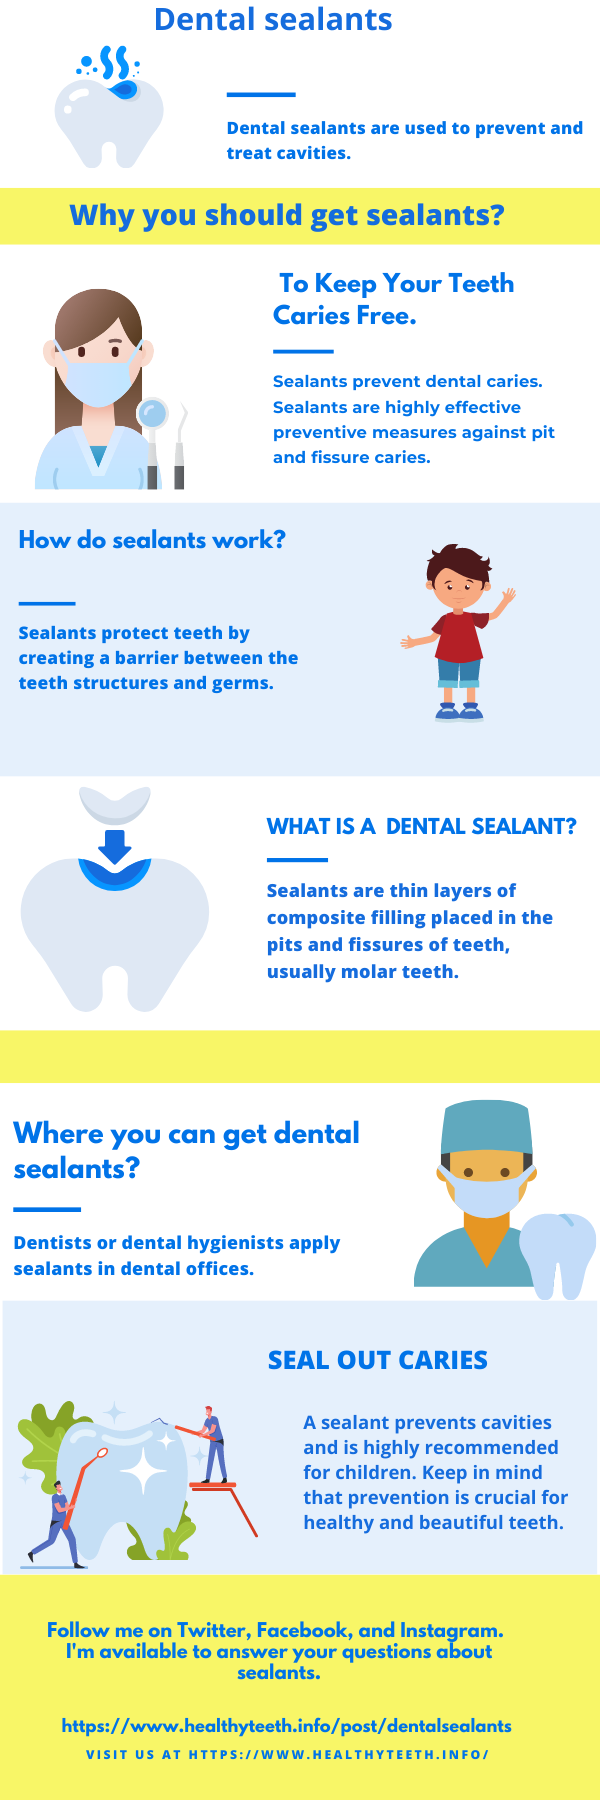 The Importance of Dental Sealants for Children